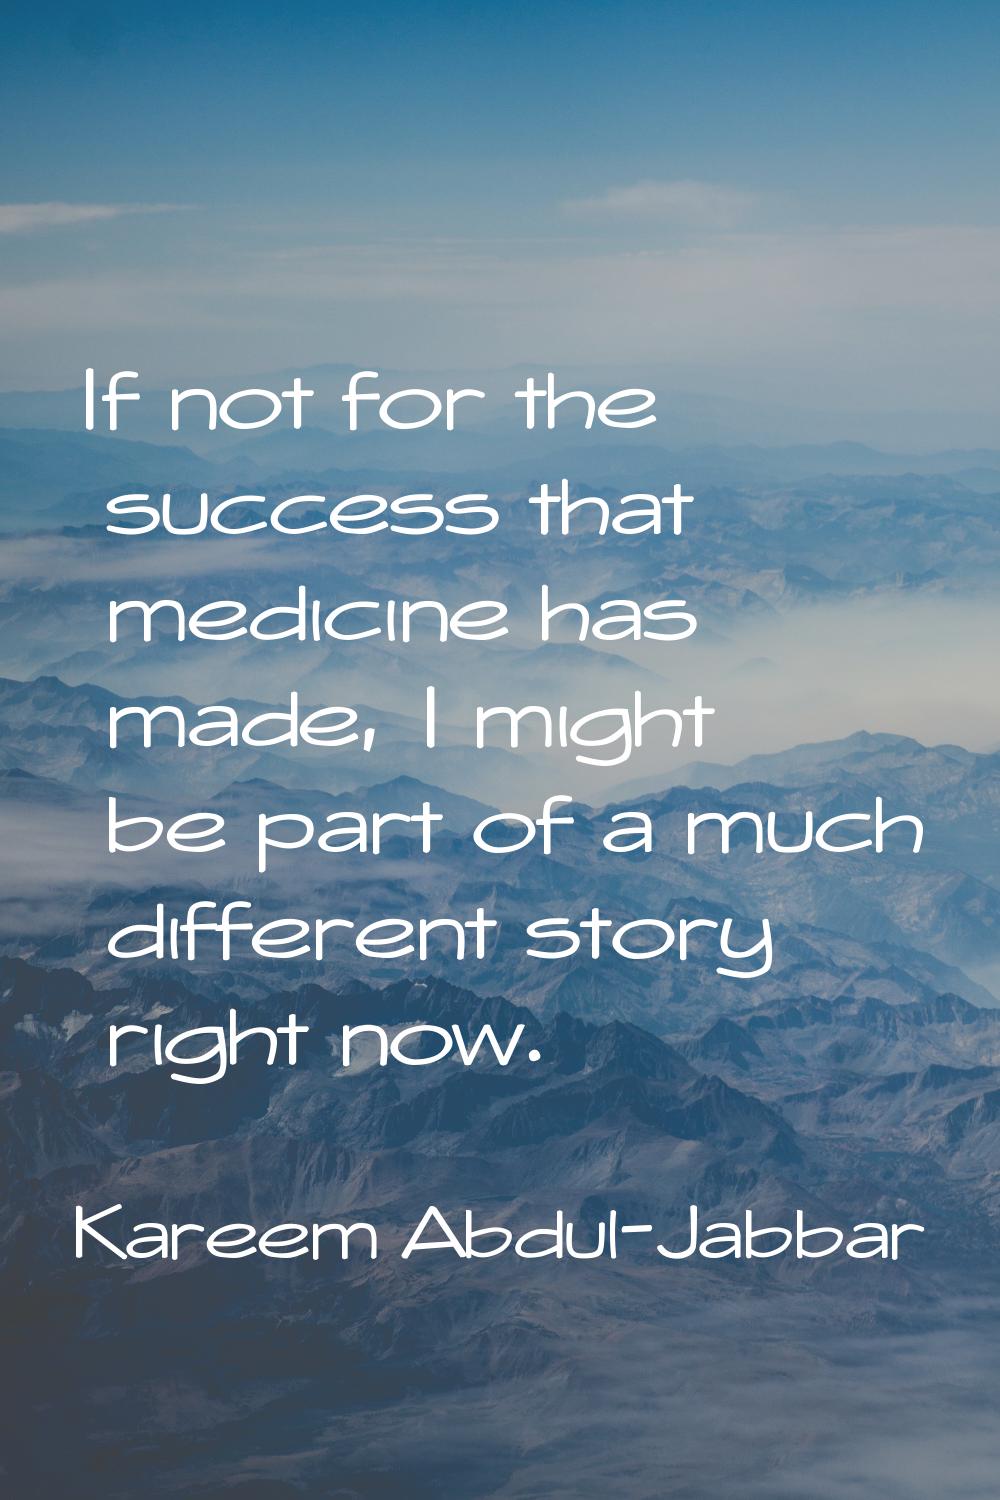 If not for the success that medicine has made, I might be part of a much different story right now.